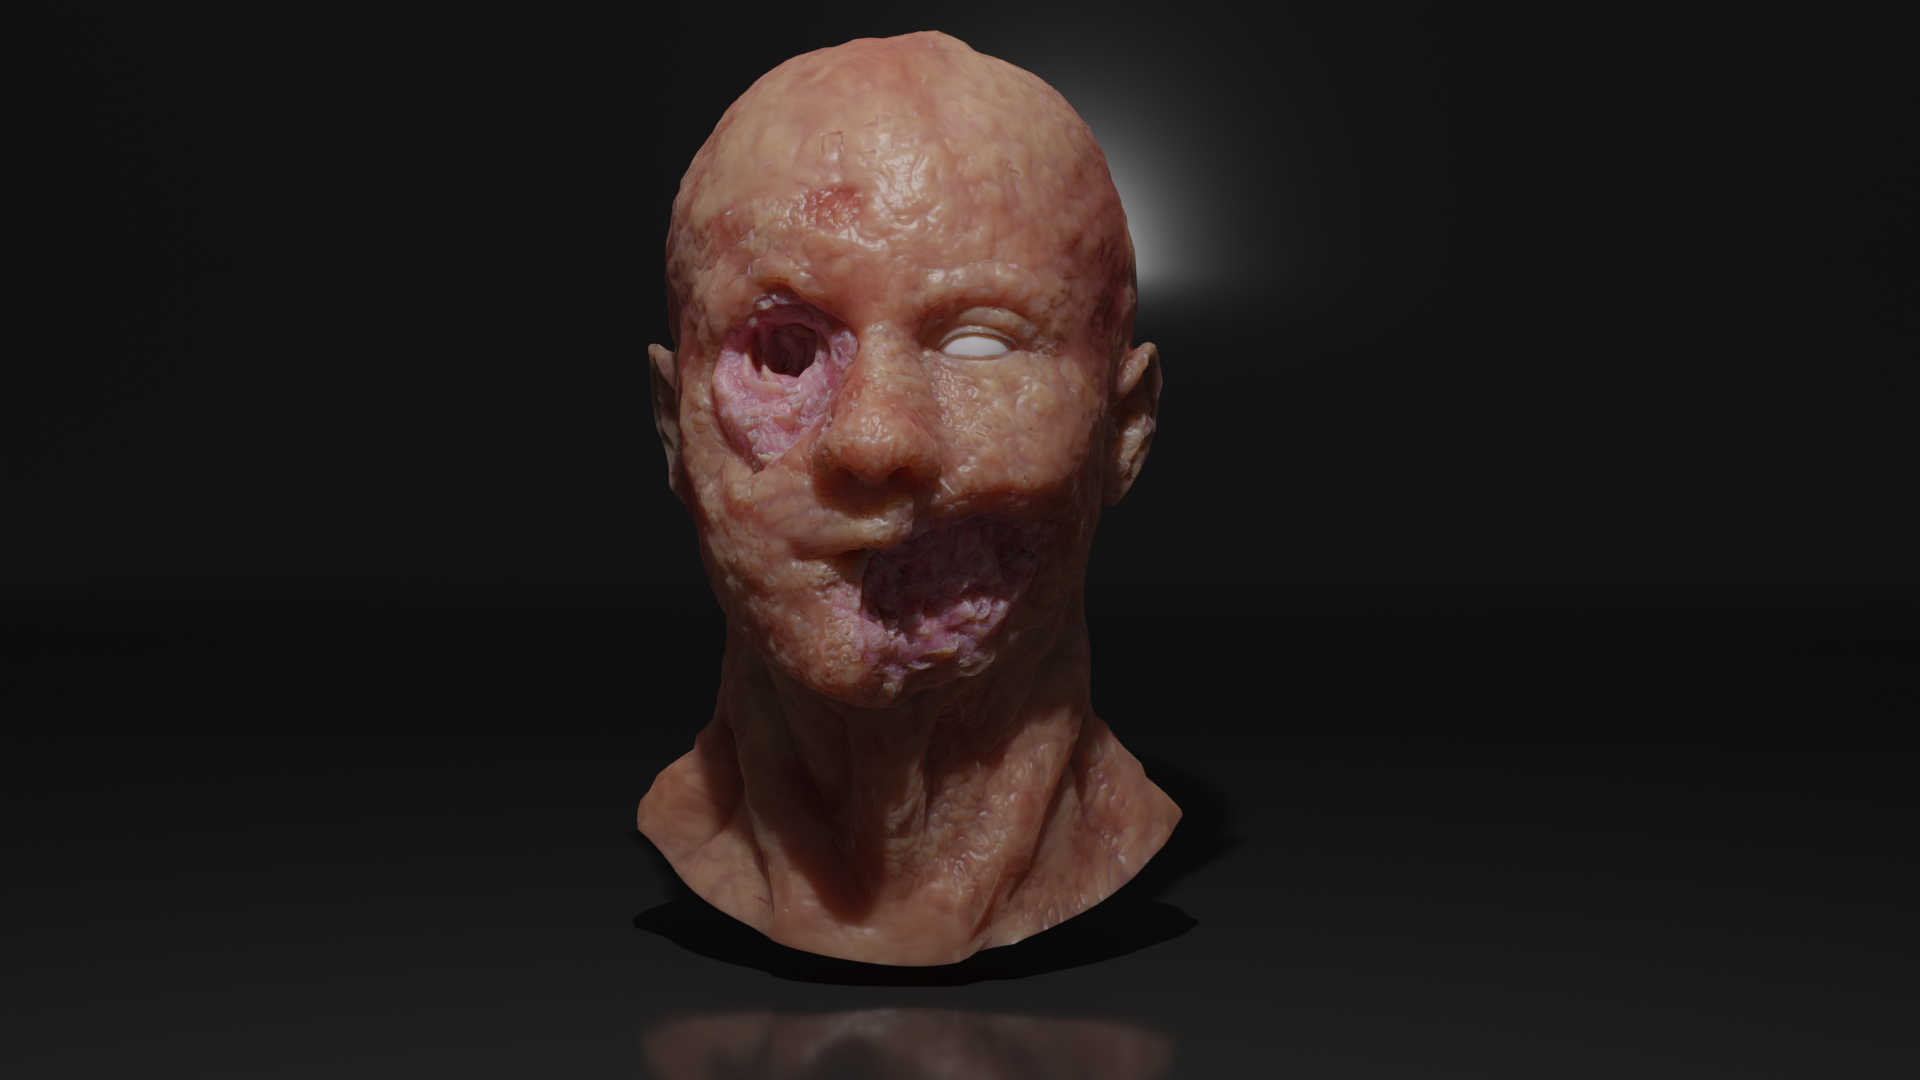 A zombie 3D concept render made by Niko